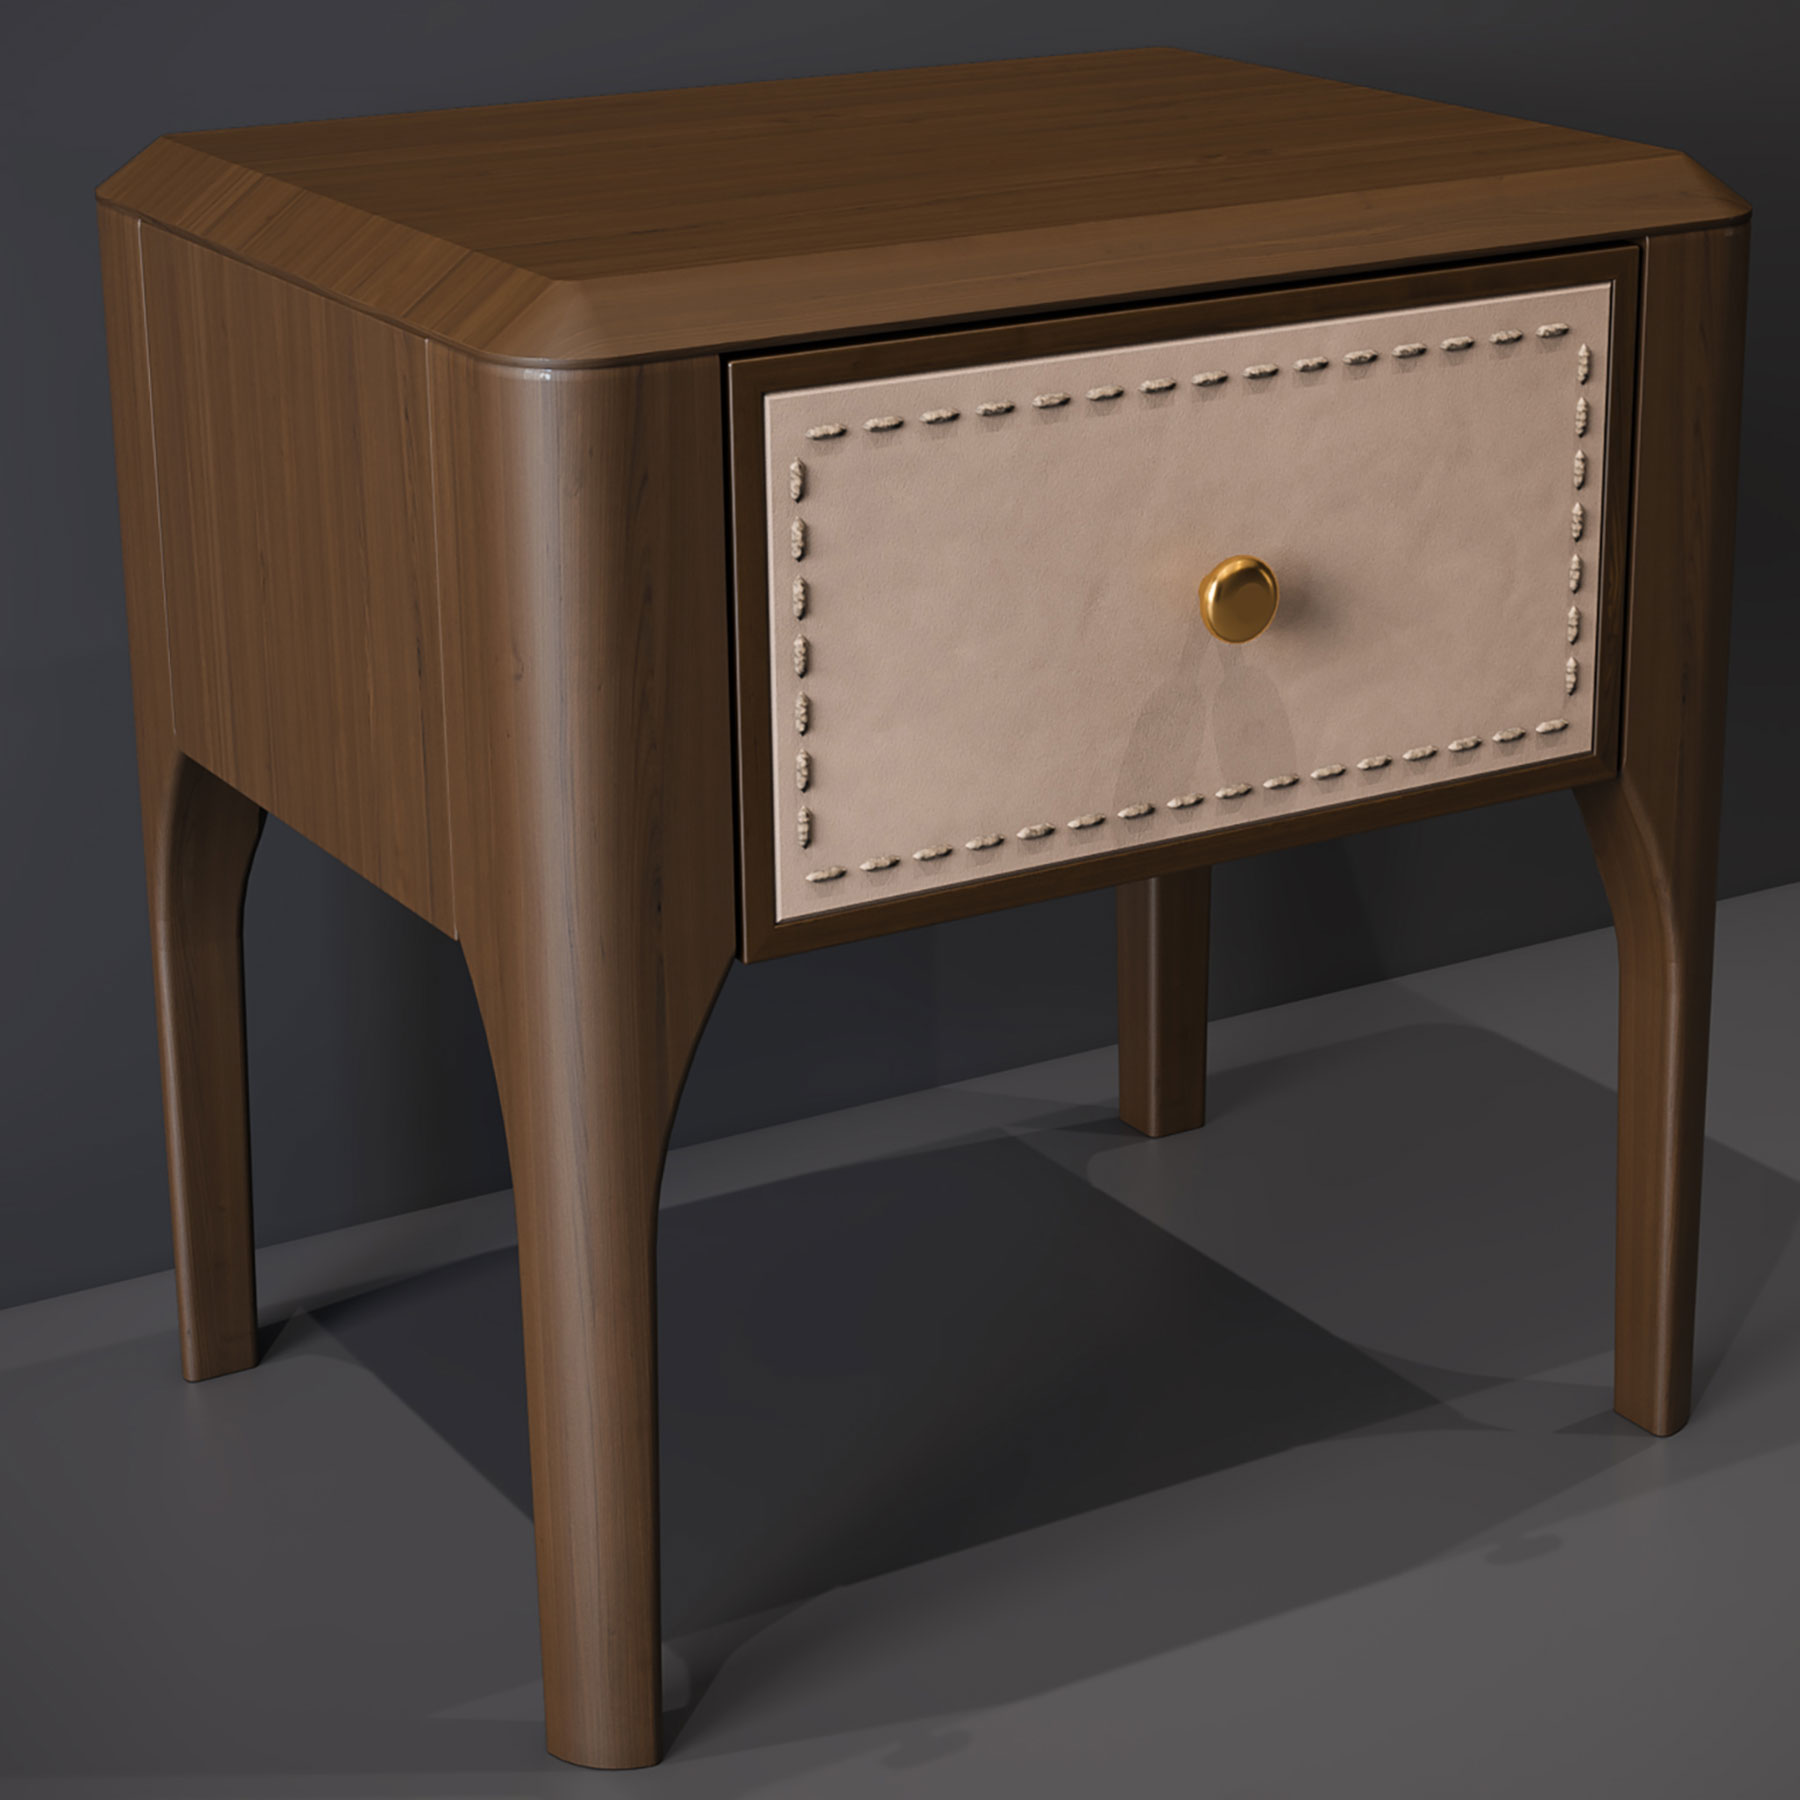 A bedside table from the Audrey collection